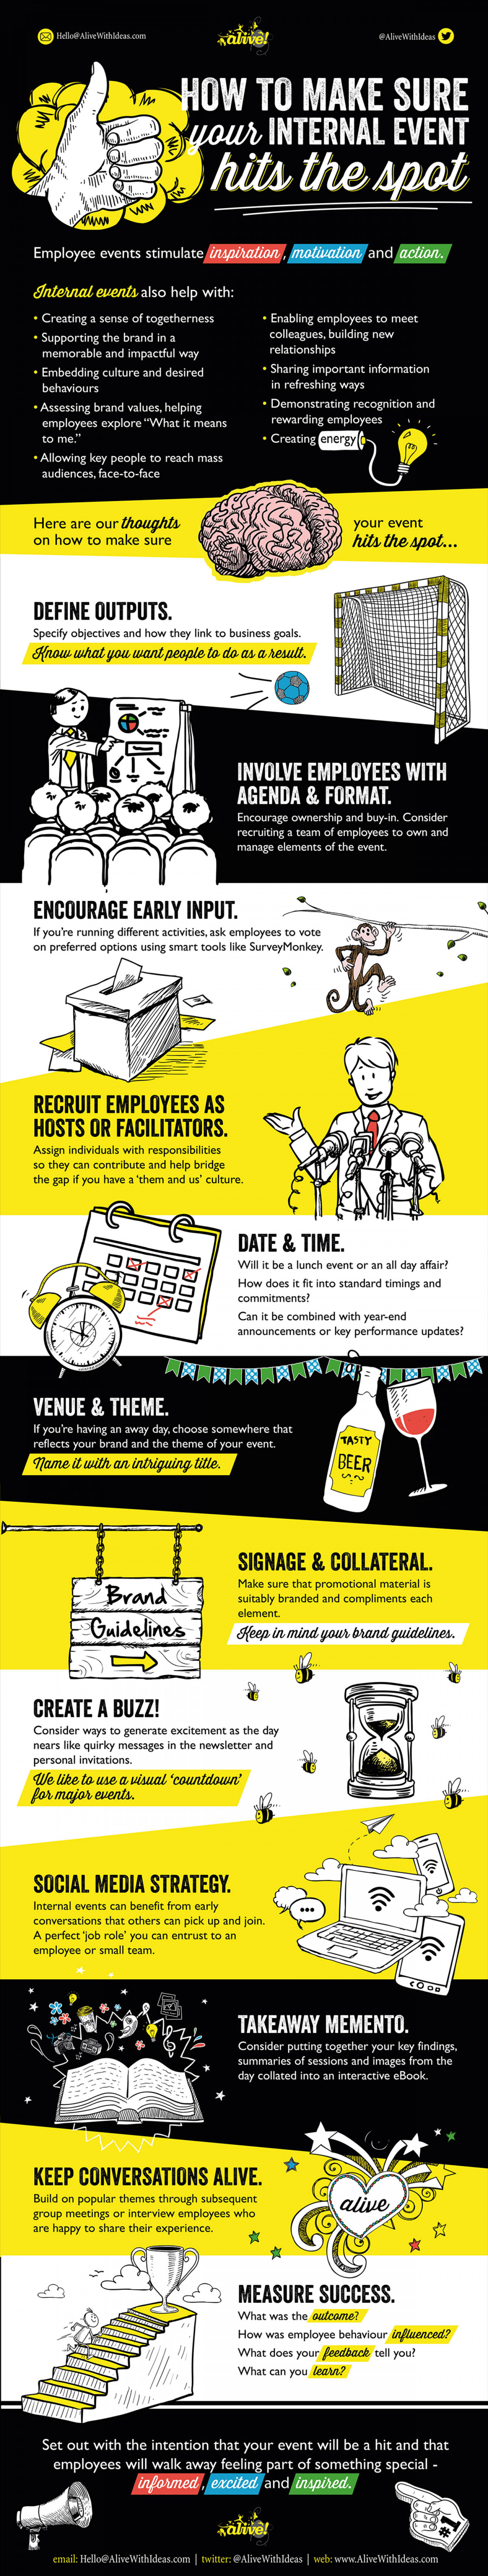 Internal Employee Events That Hit The Spot Infographic